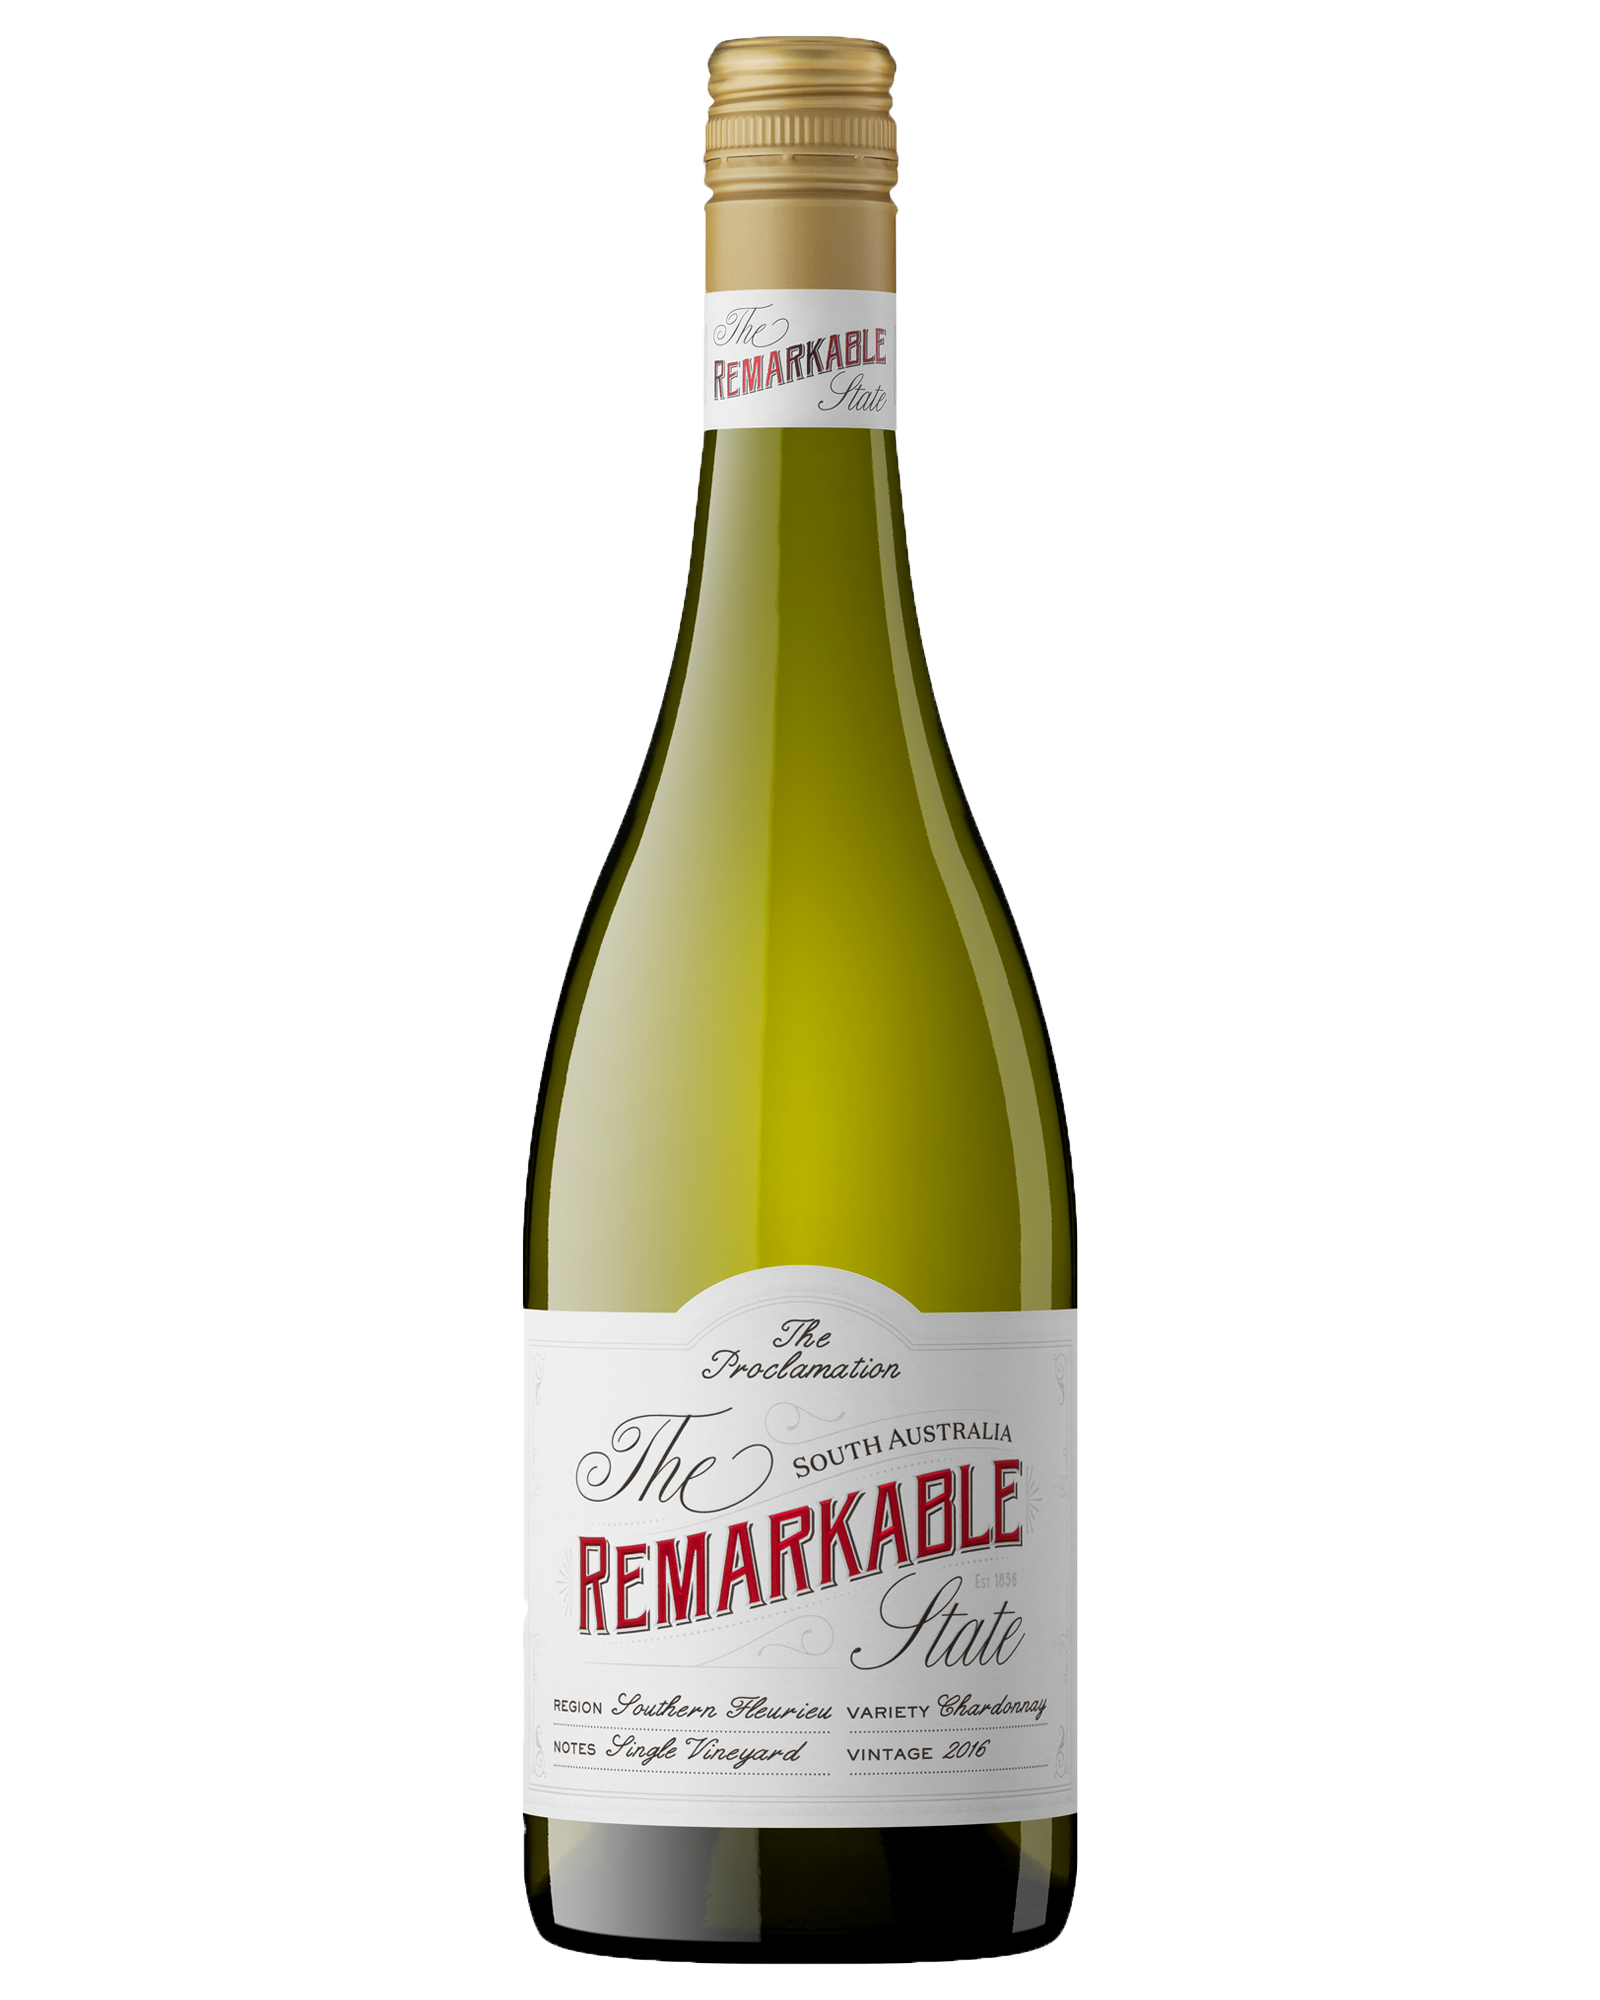 The Remarkable State Proclamation Southern Fleurieu Chardonnay 2016